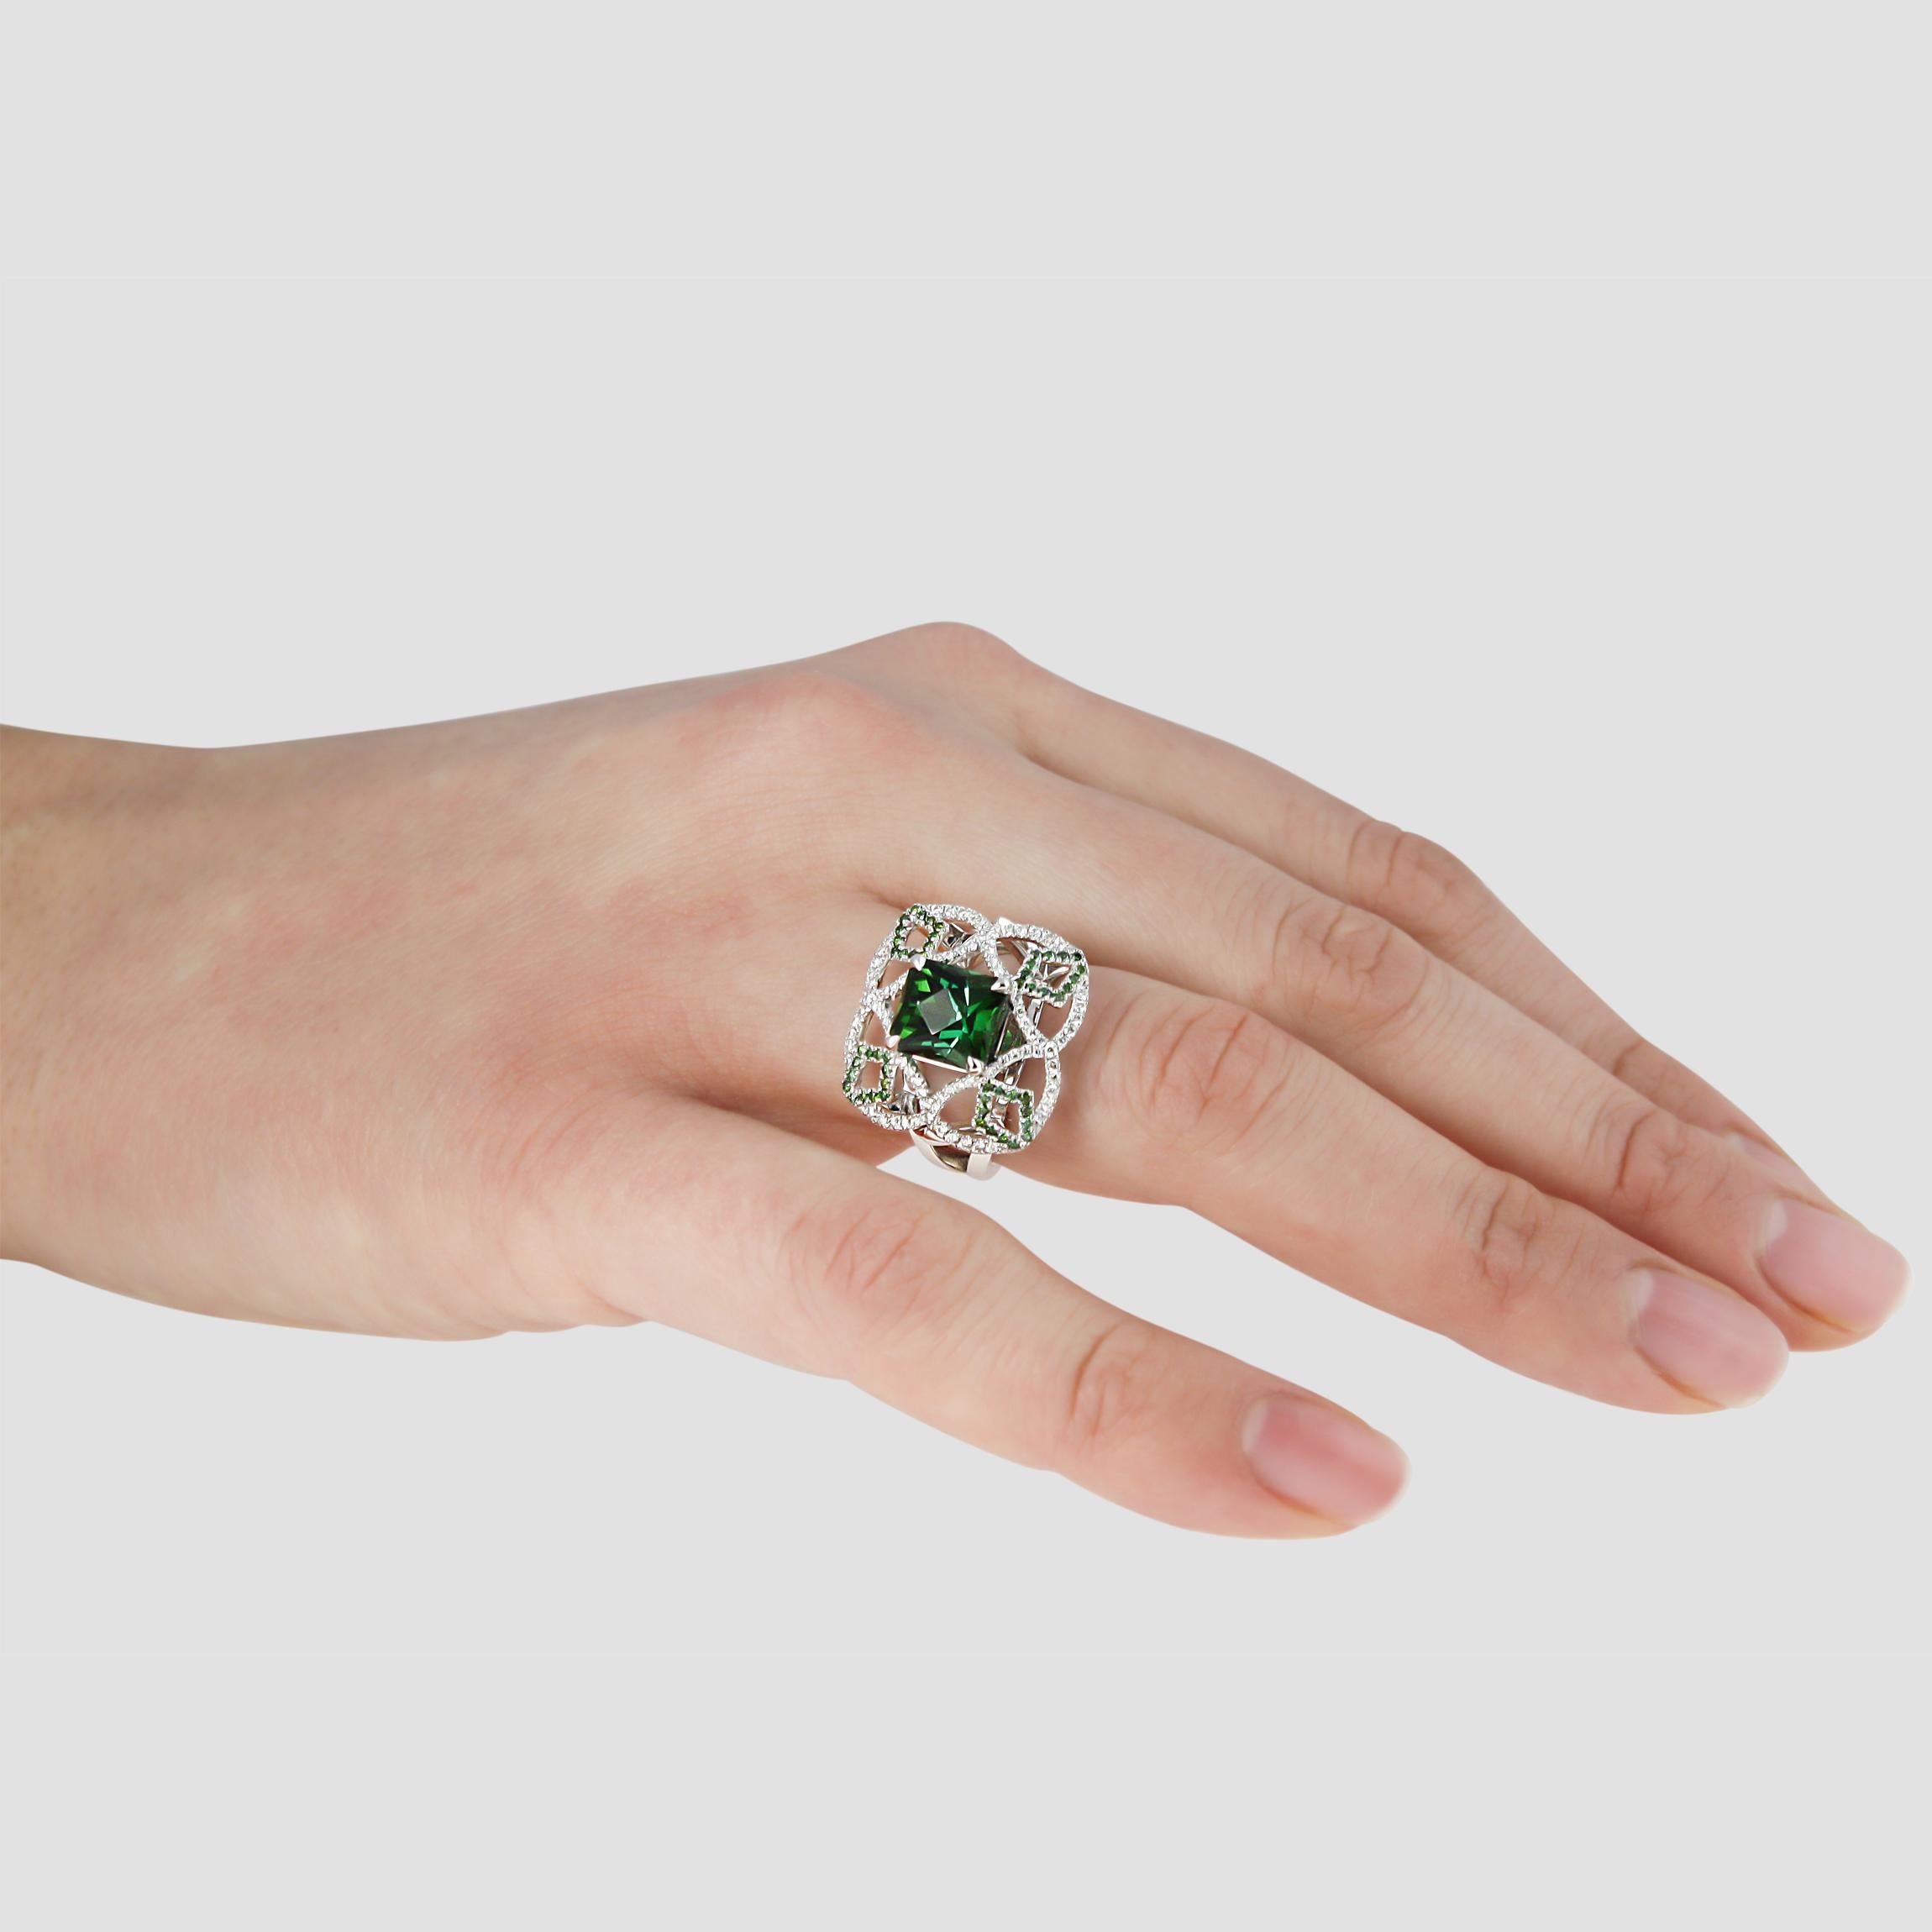 Our Pomona Ring is a 1 of 1 collection showpiece.

When creating this ring we started with the gemstone. The rich green tourmaline was uniquely cut by our lapidary craftsmen. The unusual facets draw the gaze with its many tones and depths.

We then